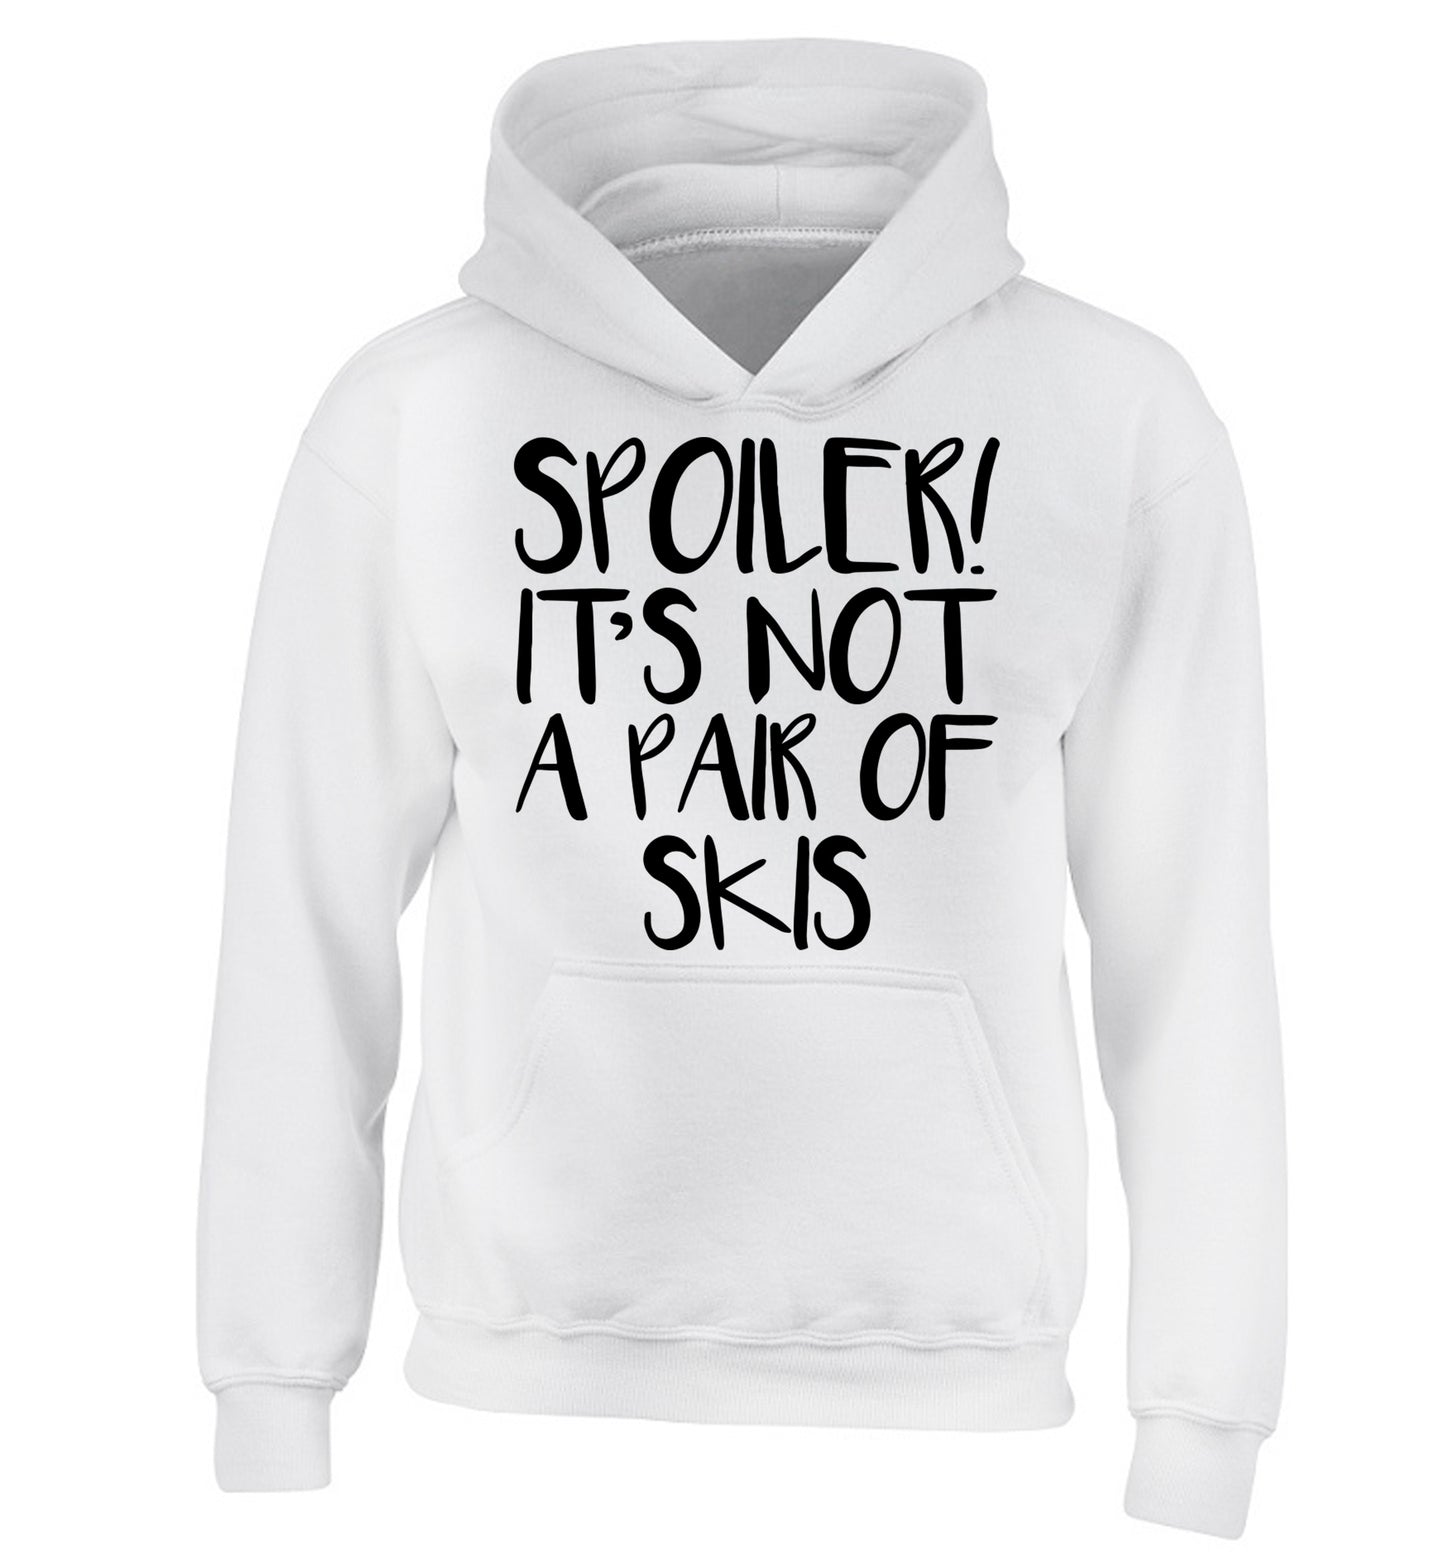 Spoiler it's not a pair of skis children's white hoodie 12-13 Years